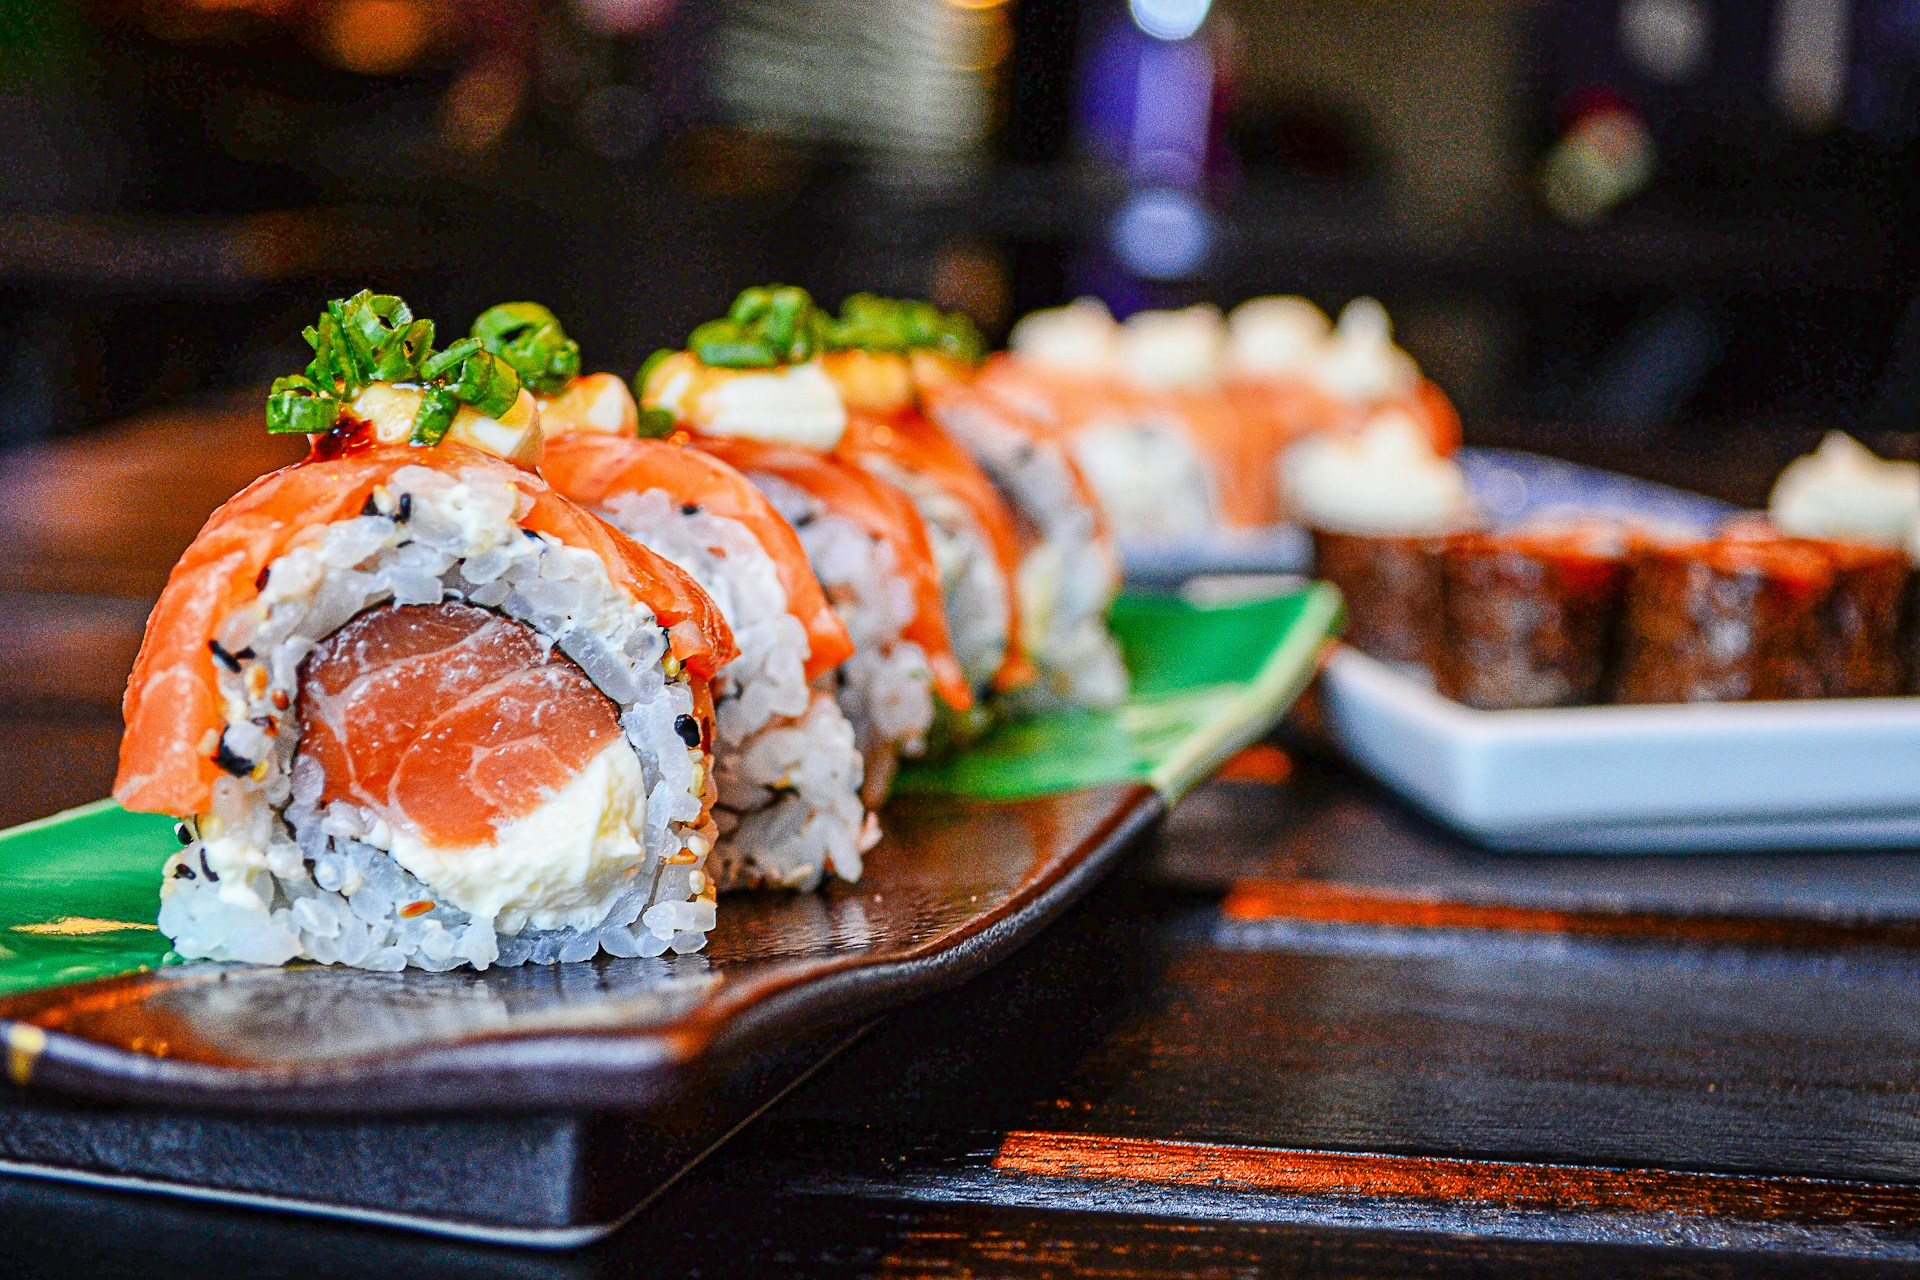 Sushi & Indian Menu Part of Oceania's New Culinary Offering